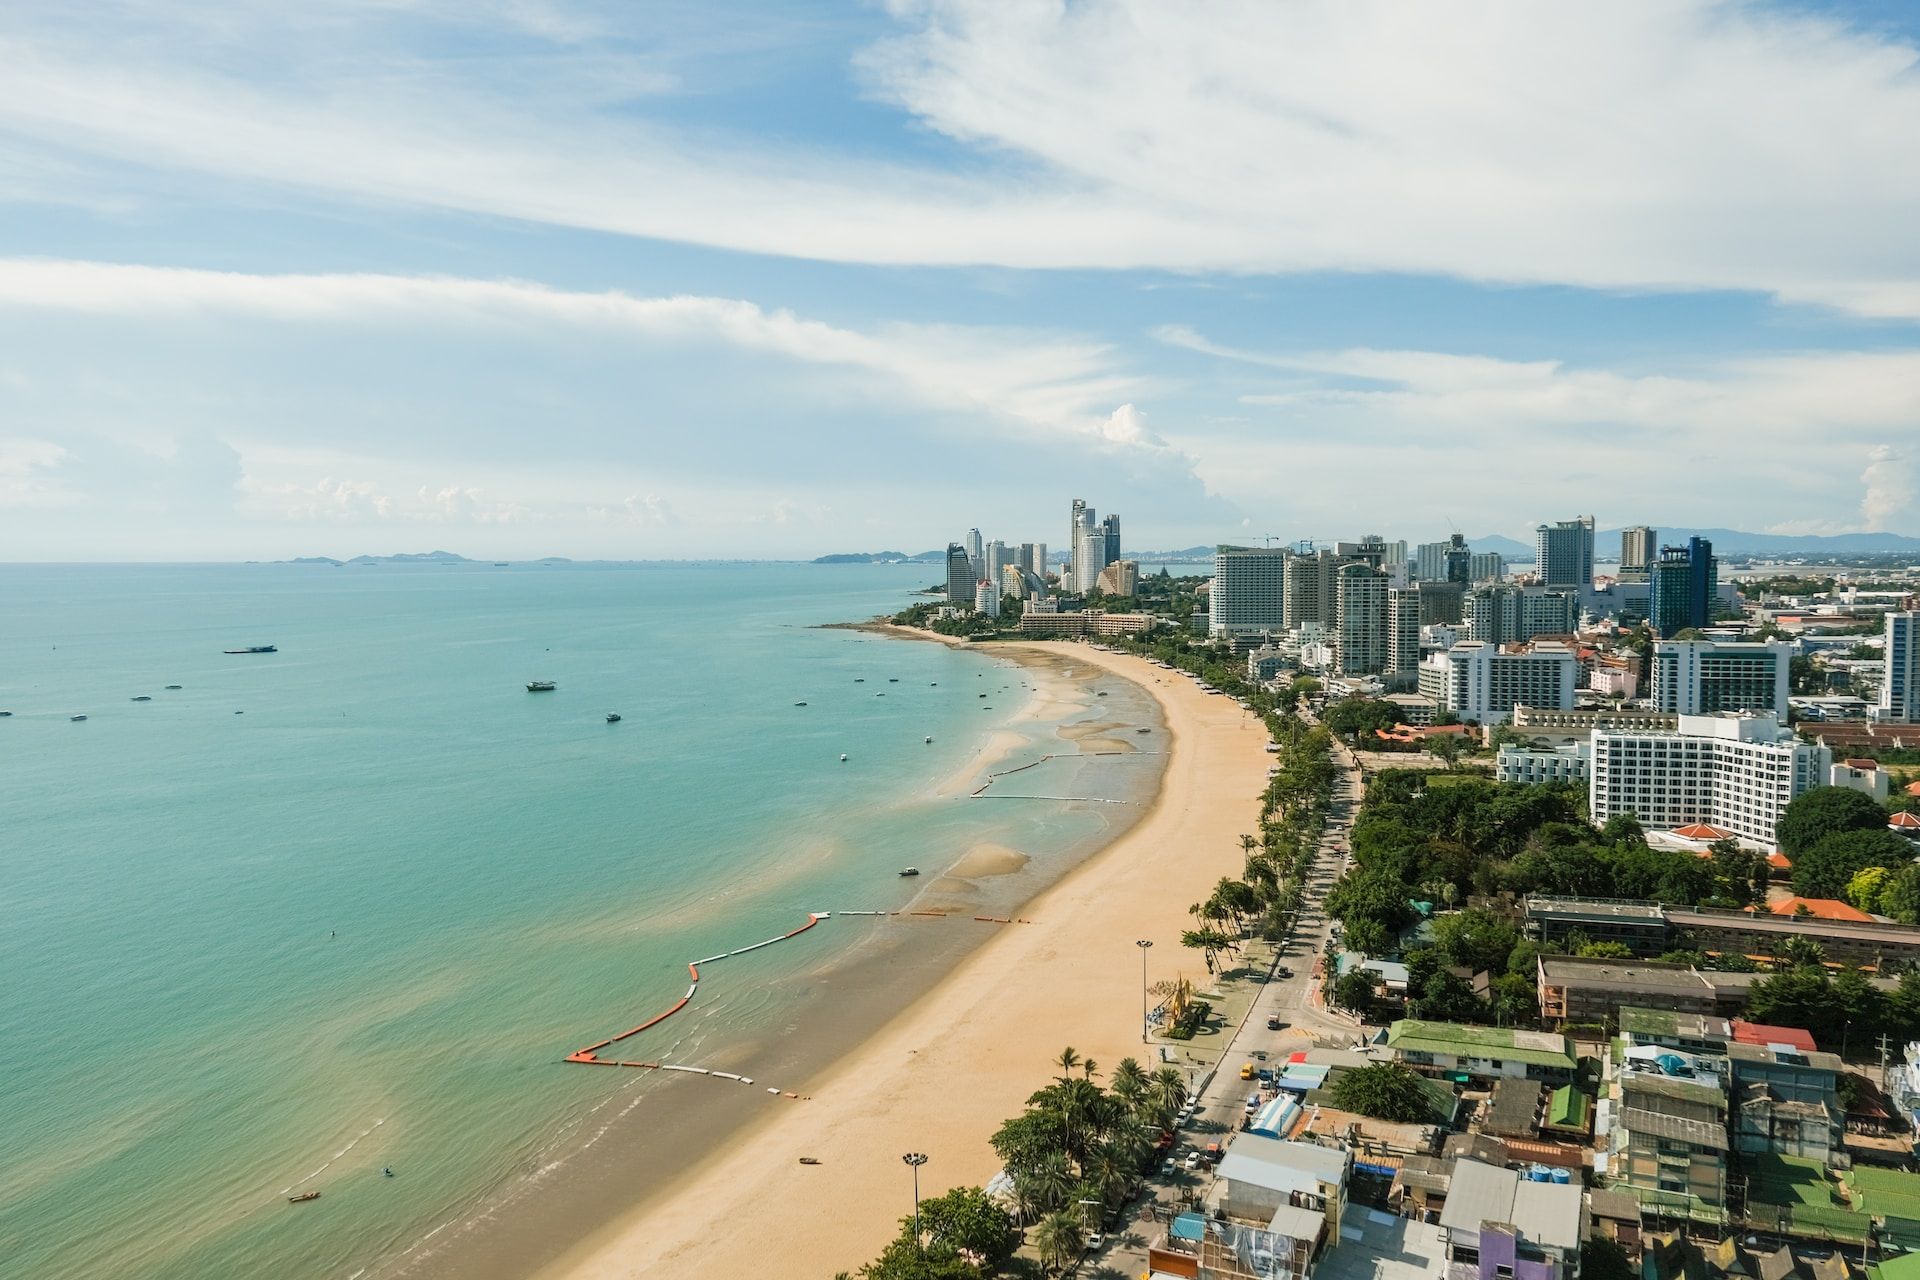 An aerial view of the sandy shores of Pattaya.